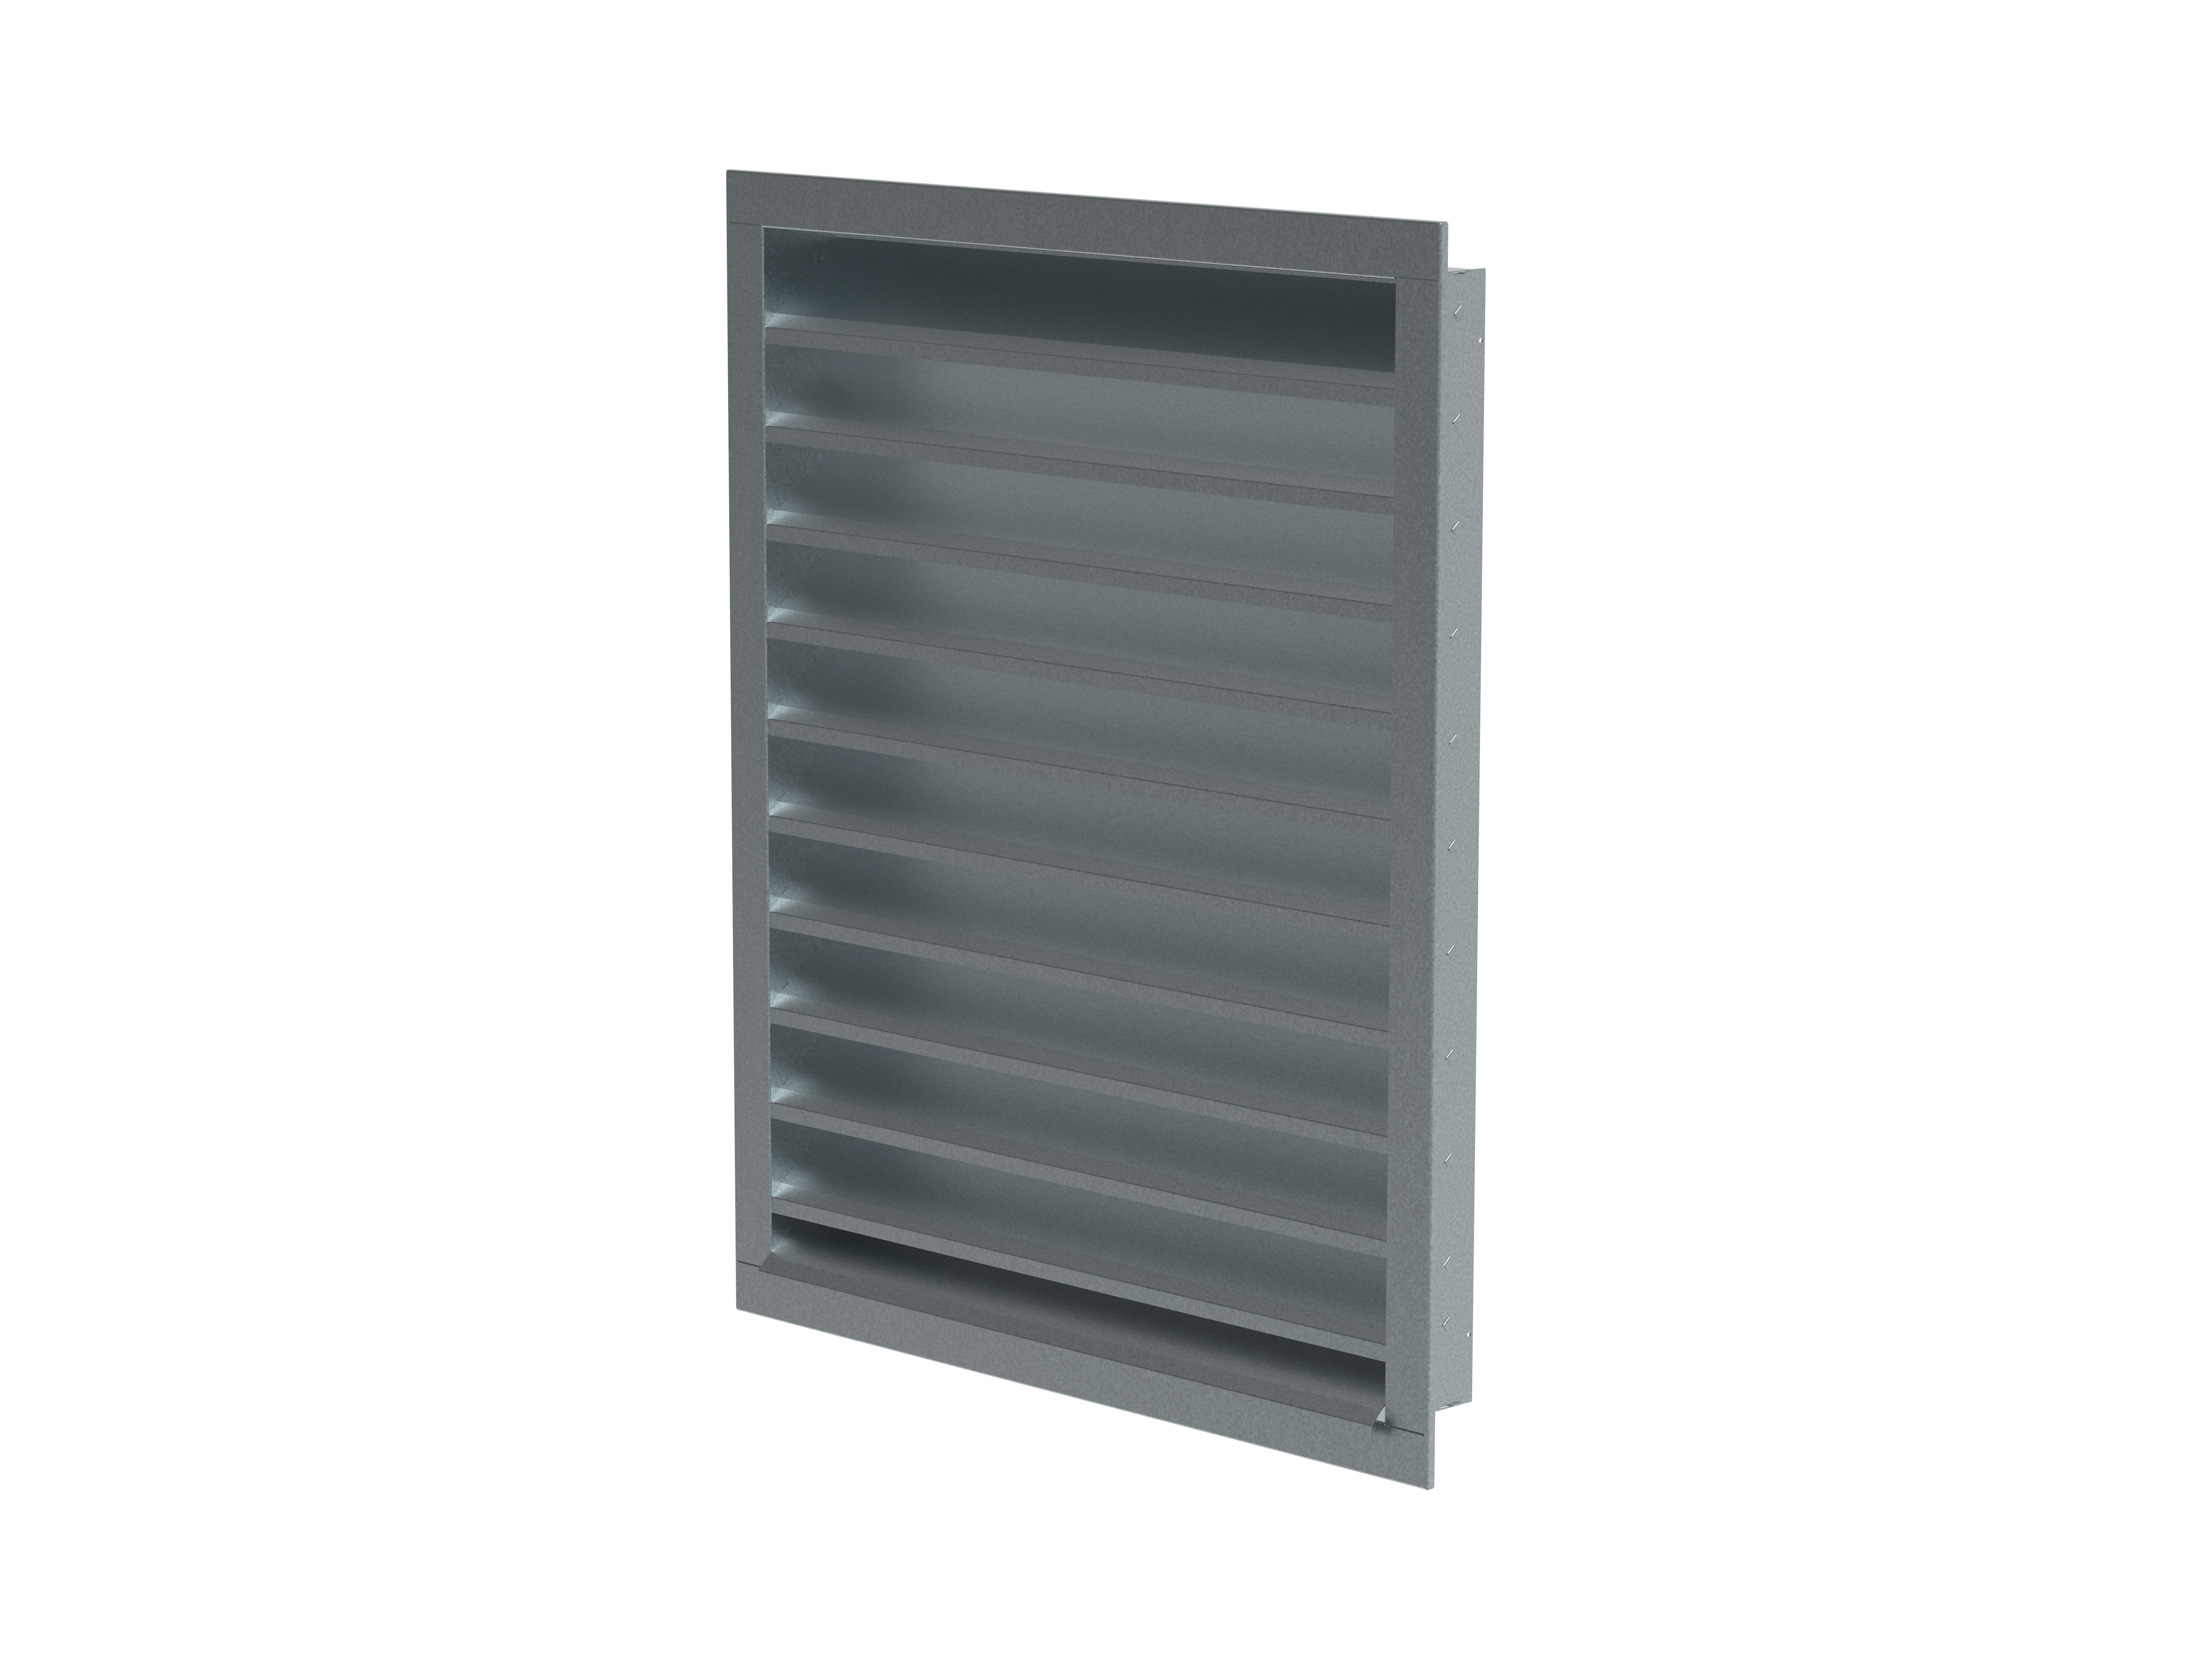 PZZNS - Louvres - Air Distribution Products - Ürünler - Systemair